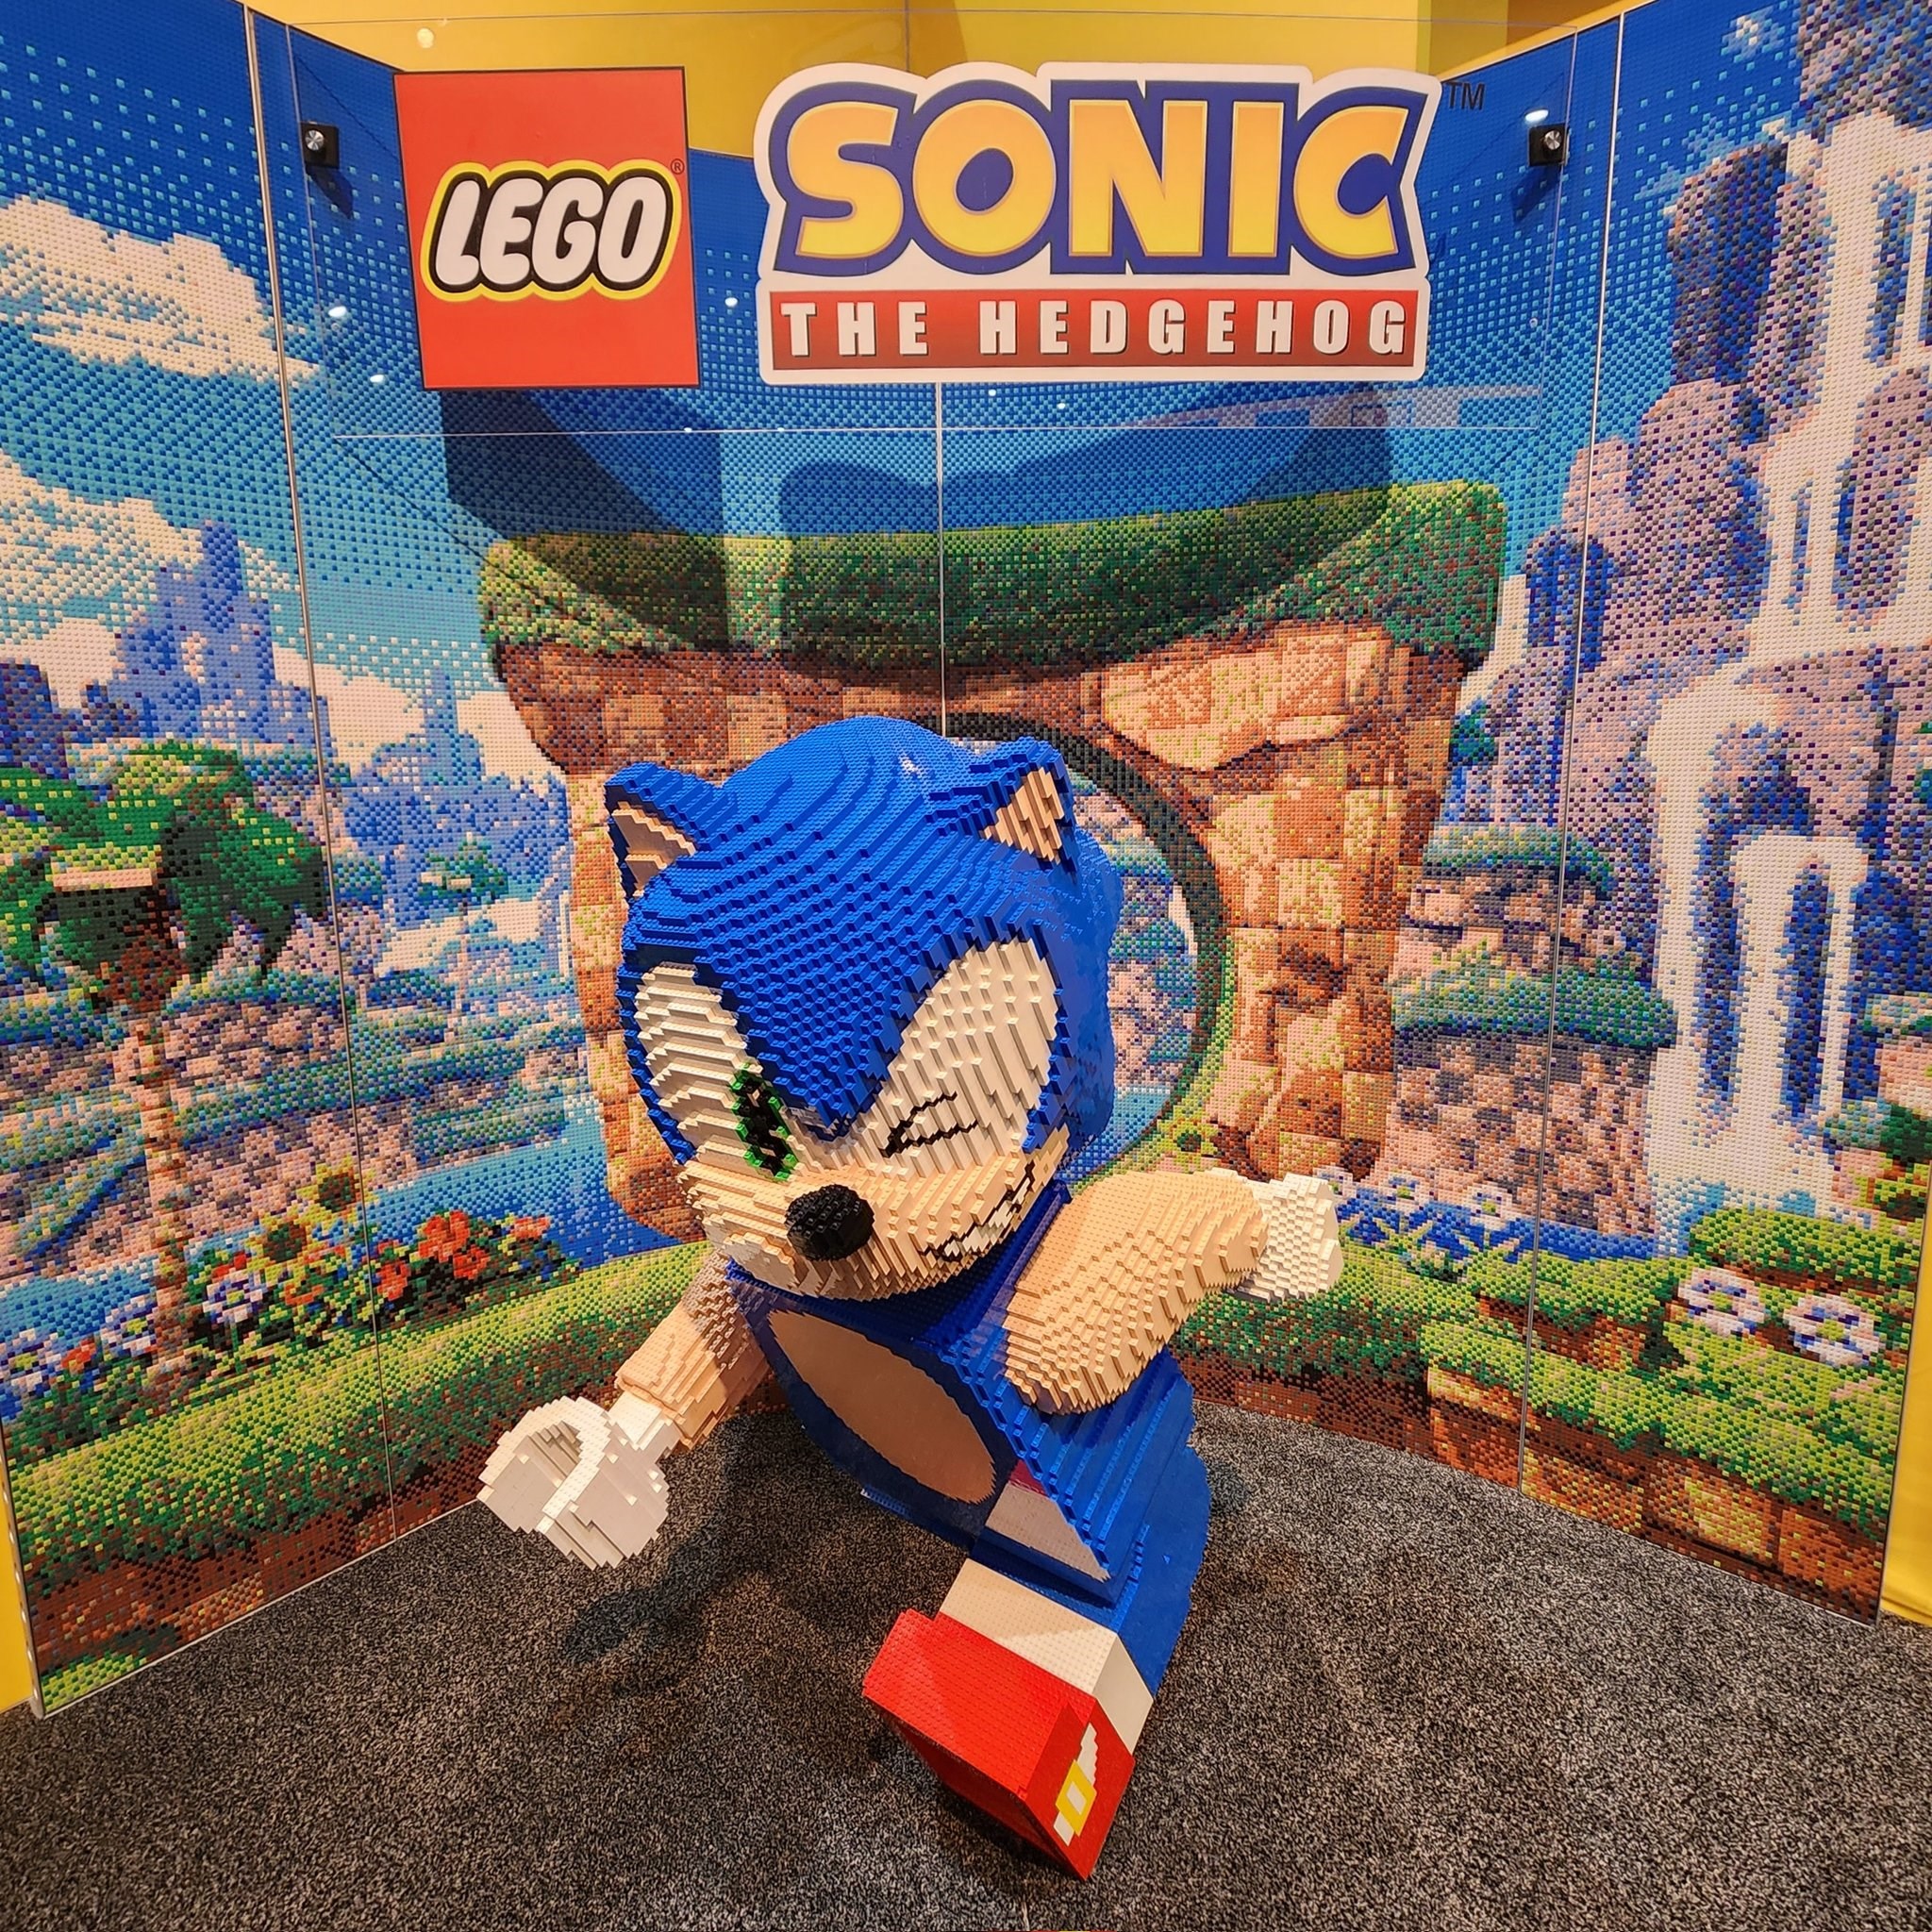 New Sonic the Hedgehog Lego kits will reportedly release in August